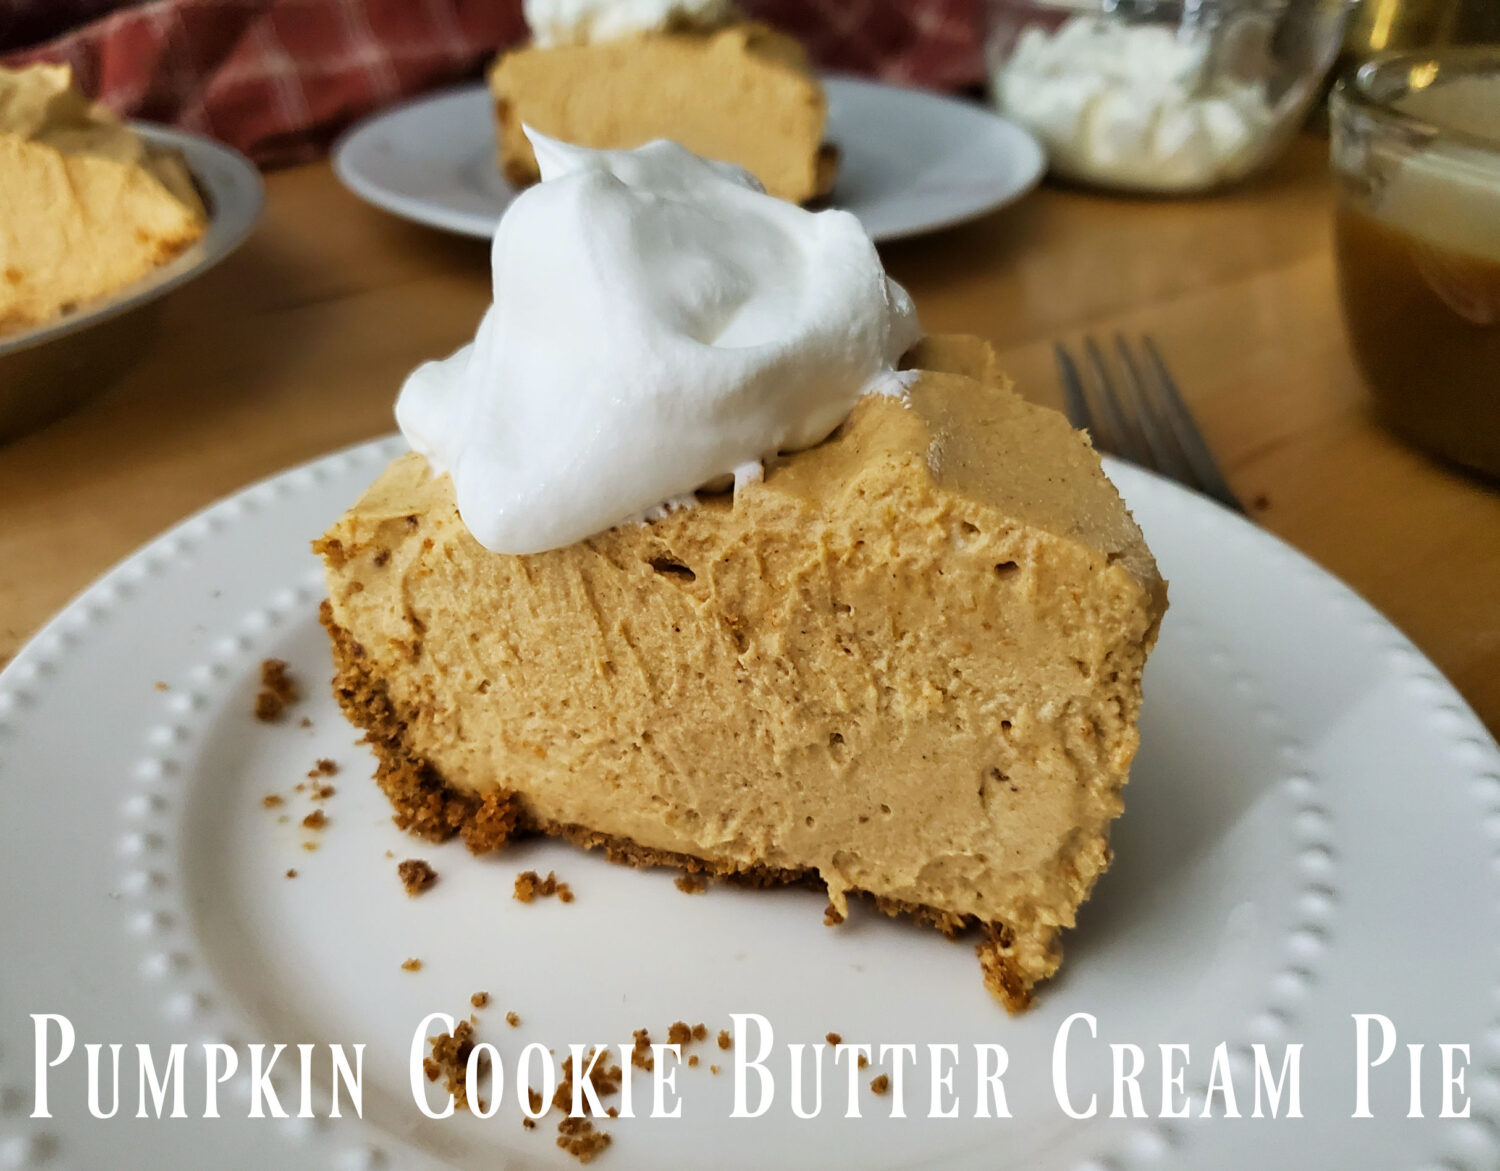 Creamy spiced pumpkin-cookie butter fluffy filling with a gingersnap cookie crust. Serve with extra whipped cream and salted caramel sauce!